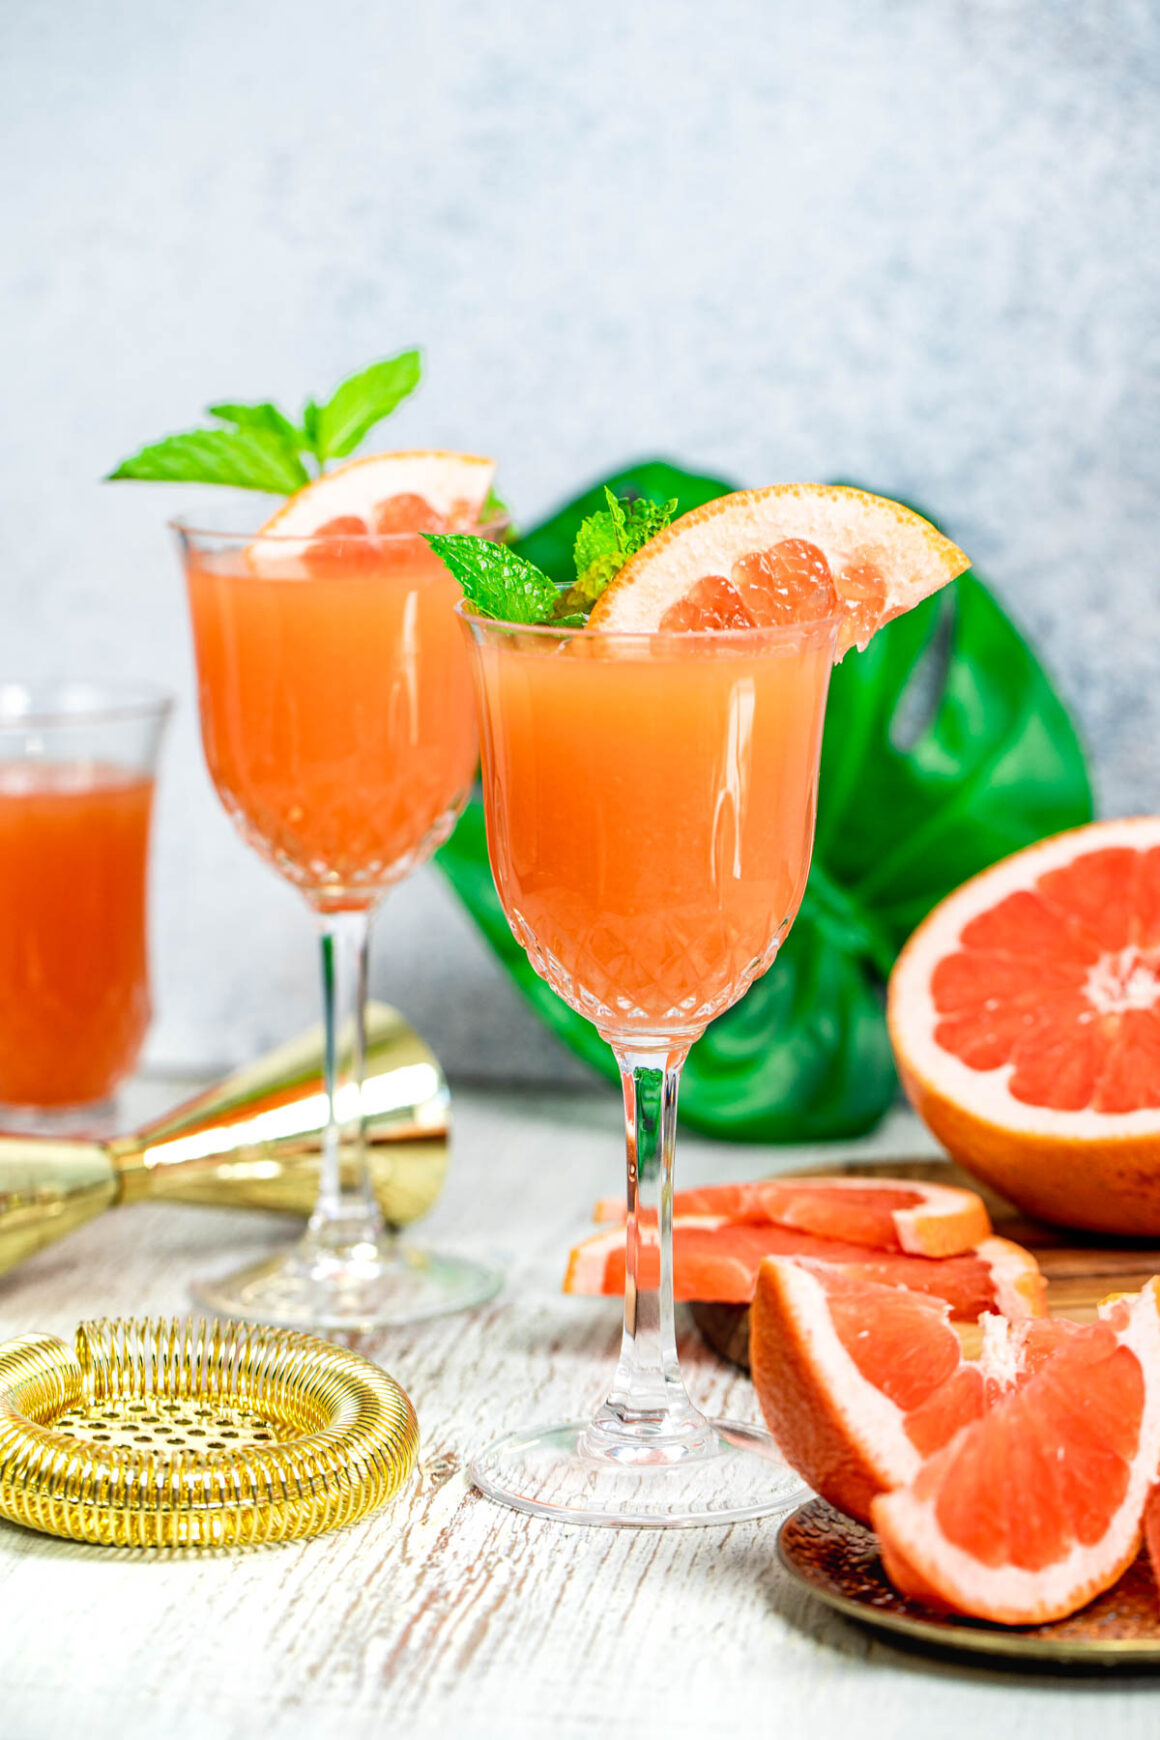 This well-balanced tart and sweet refreshing Grapefruit Martini have that flavor that can be enjoyed for this summer season!